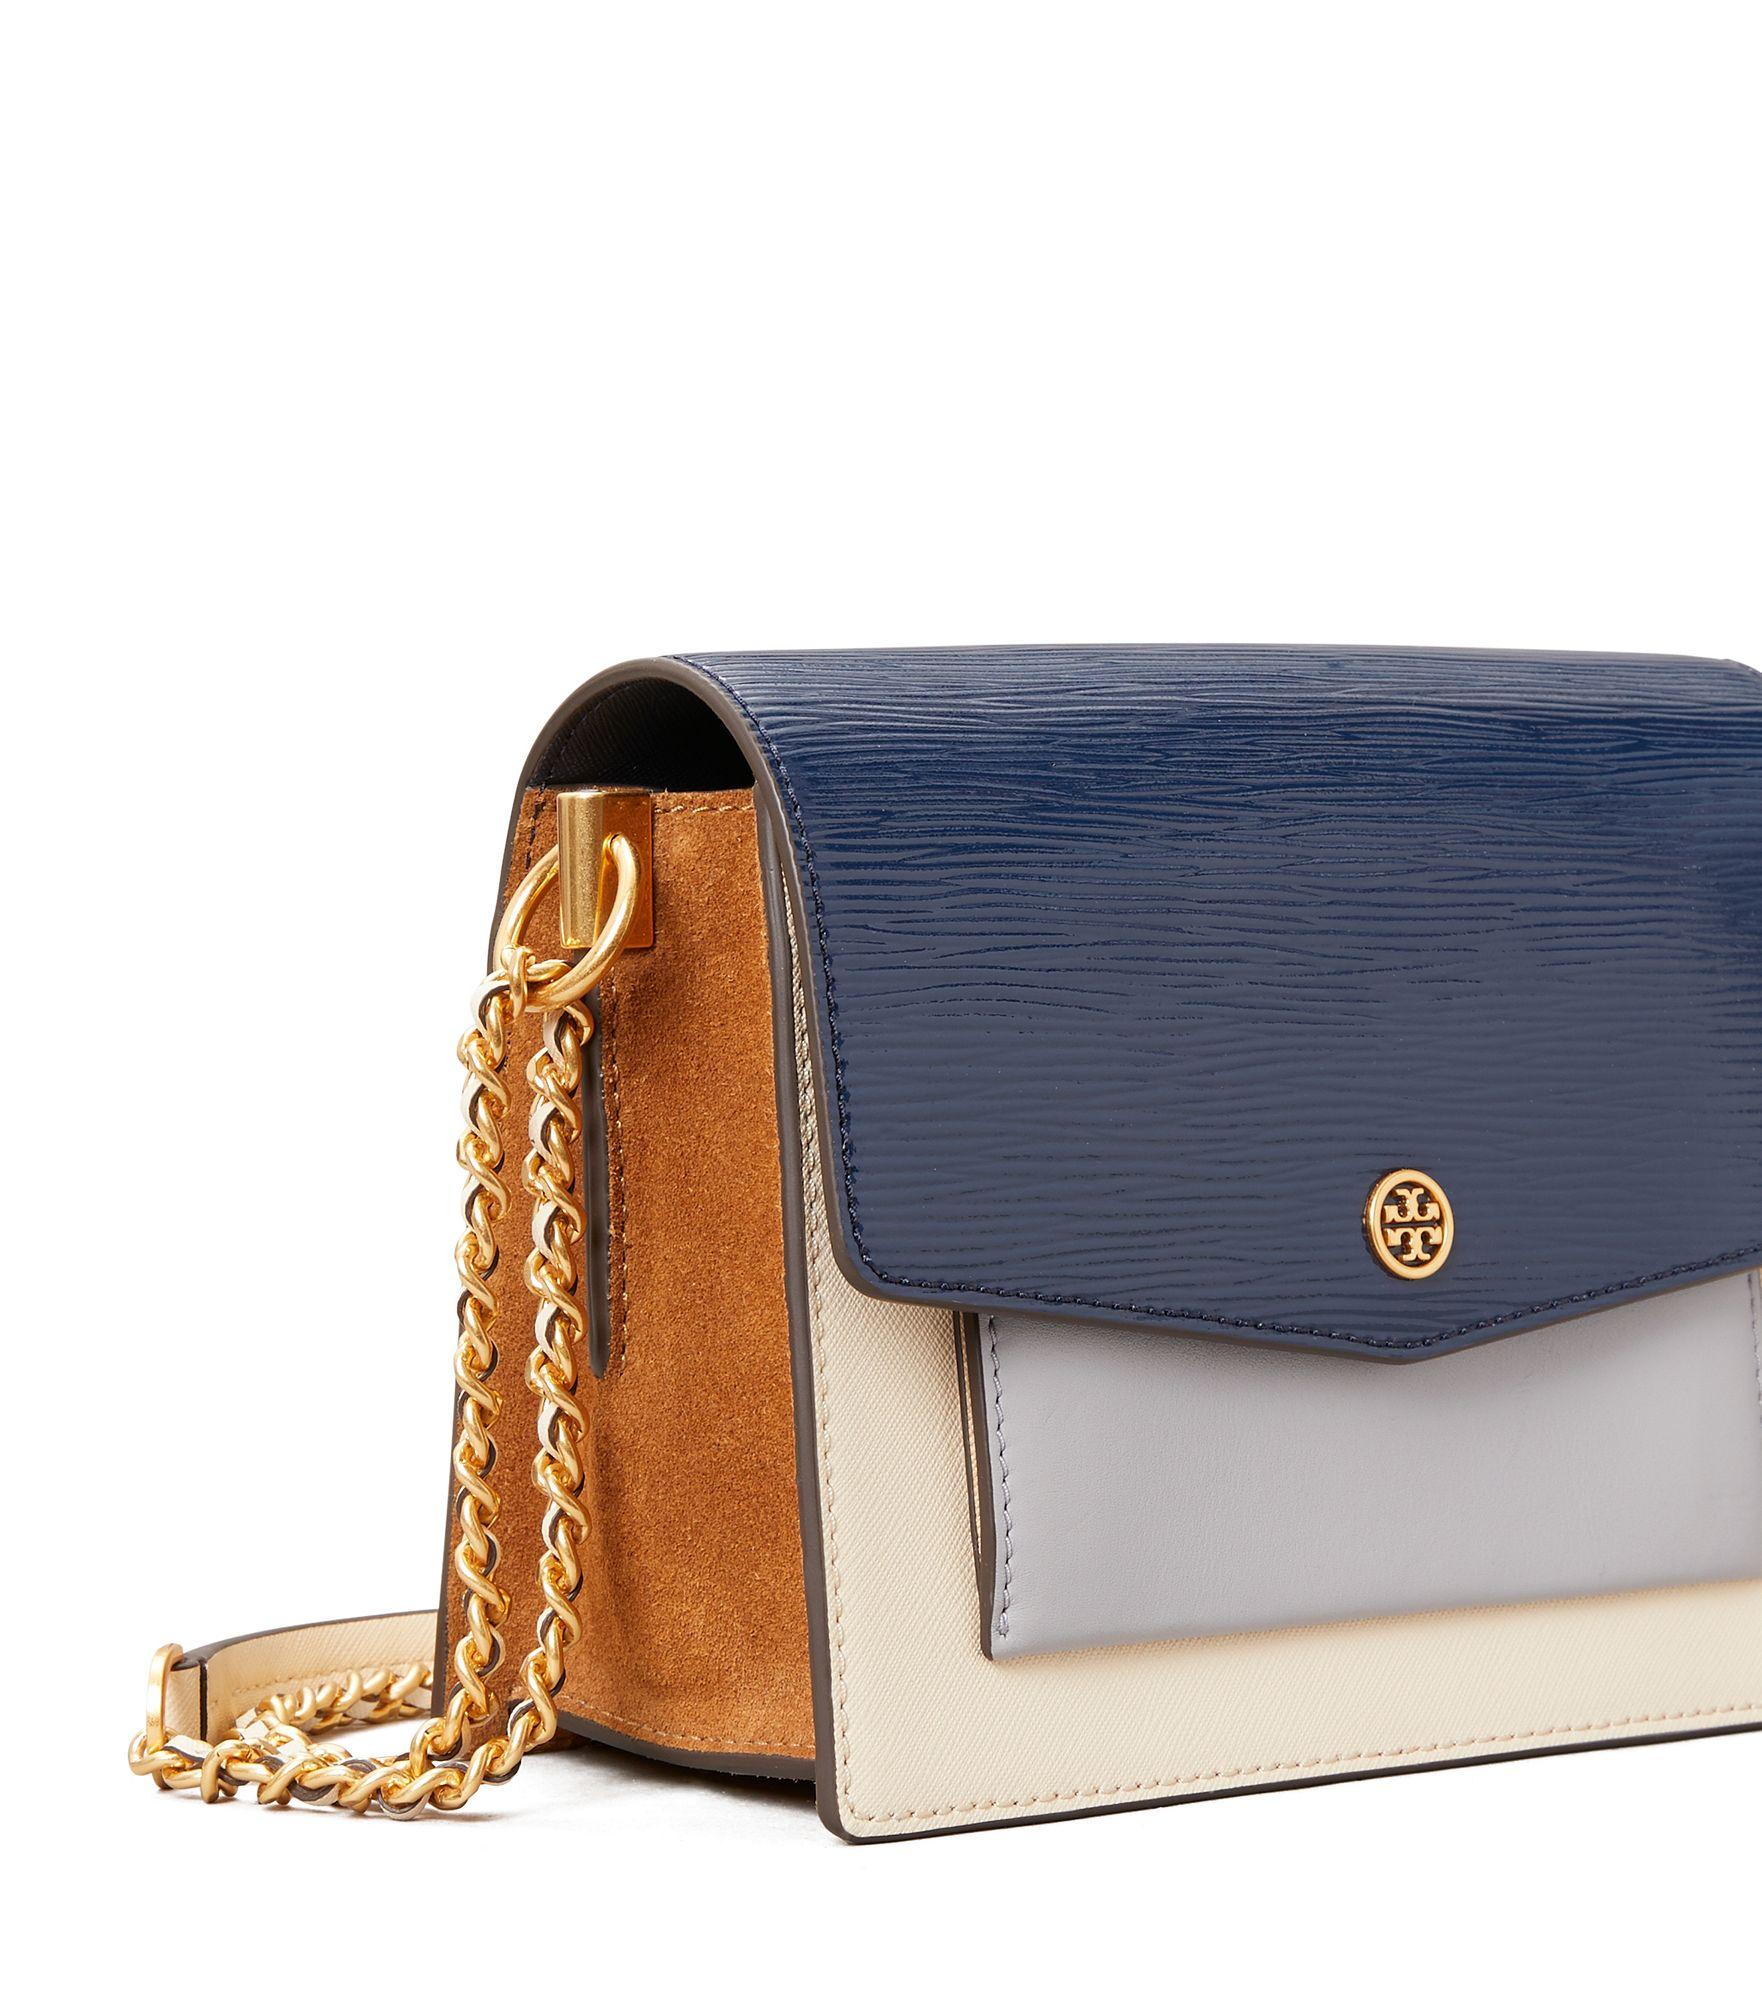 Tory Burch Leather Robinson Color-block Convertible Shoulder Bag in ...